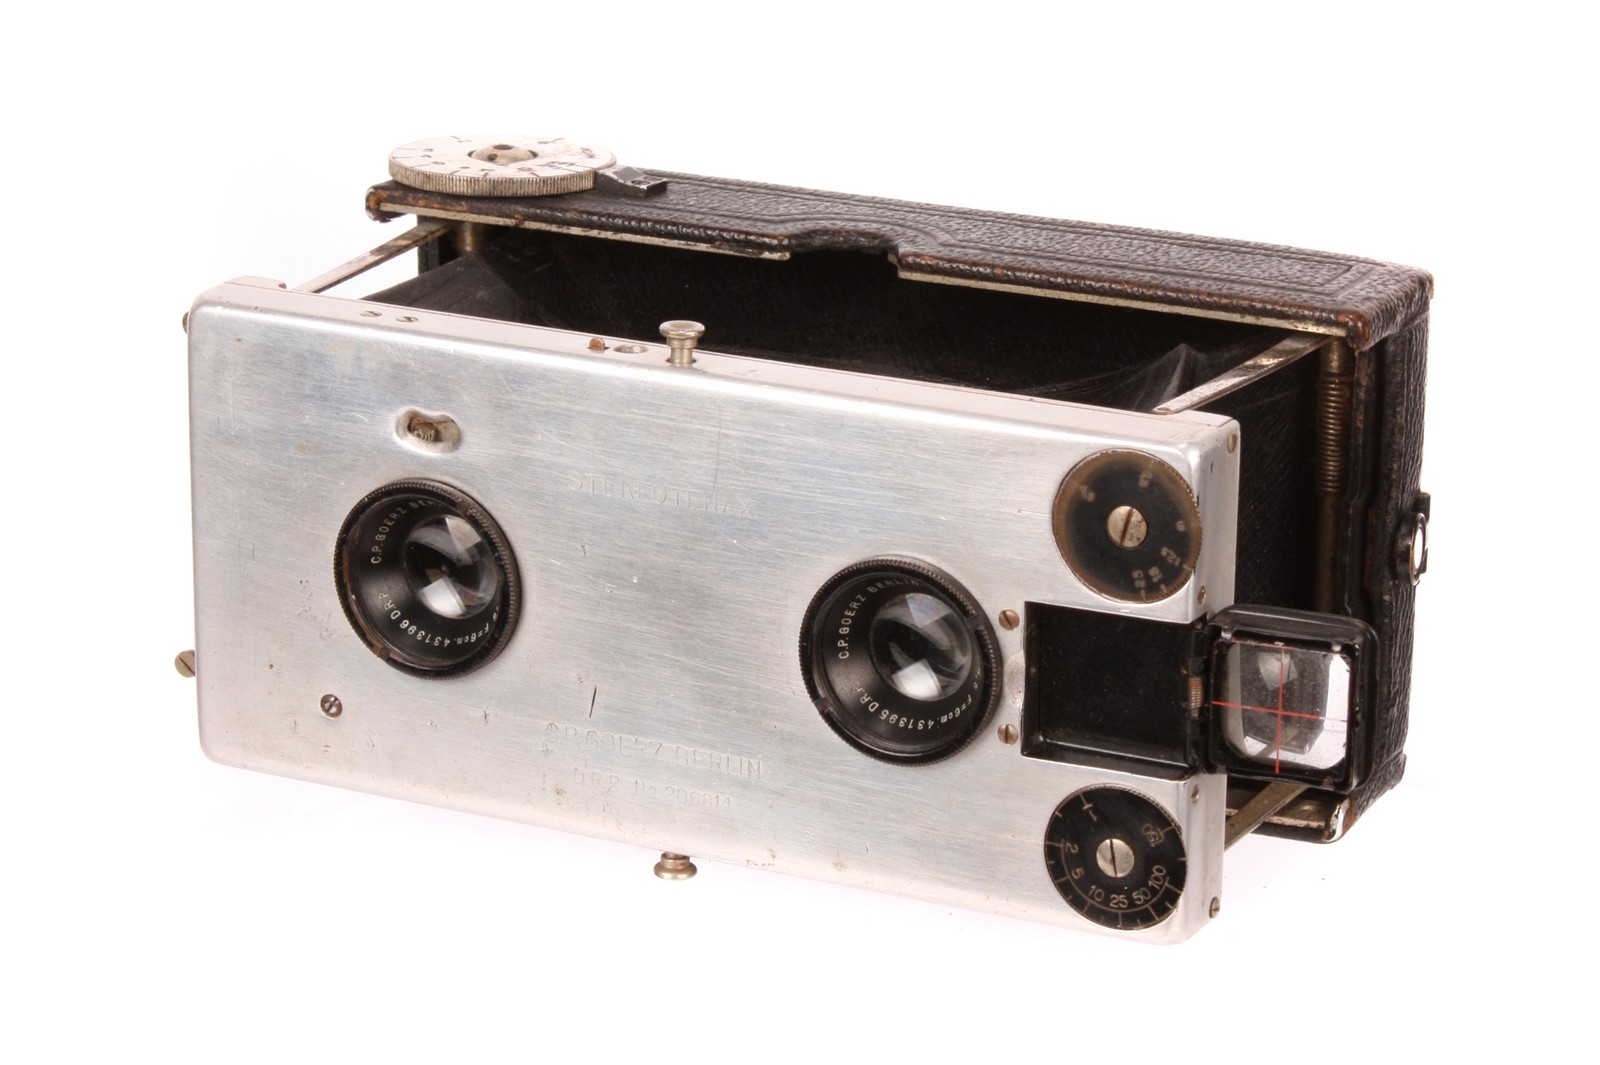 A C. P. Goerz Stereotenax Stereo Camera, unusual aluminium front, 45x107mm, with C. P. Goerz